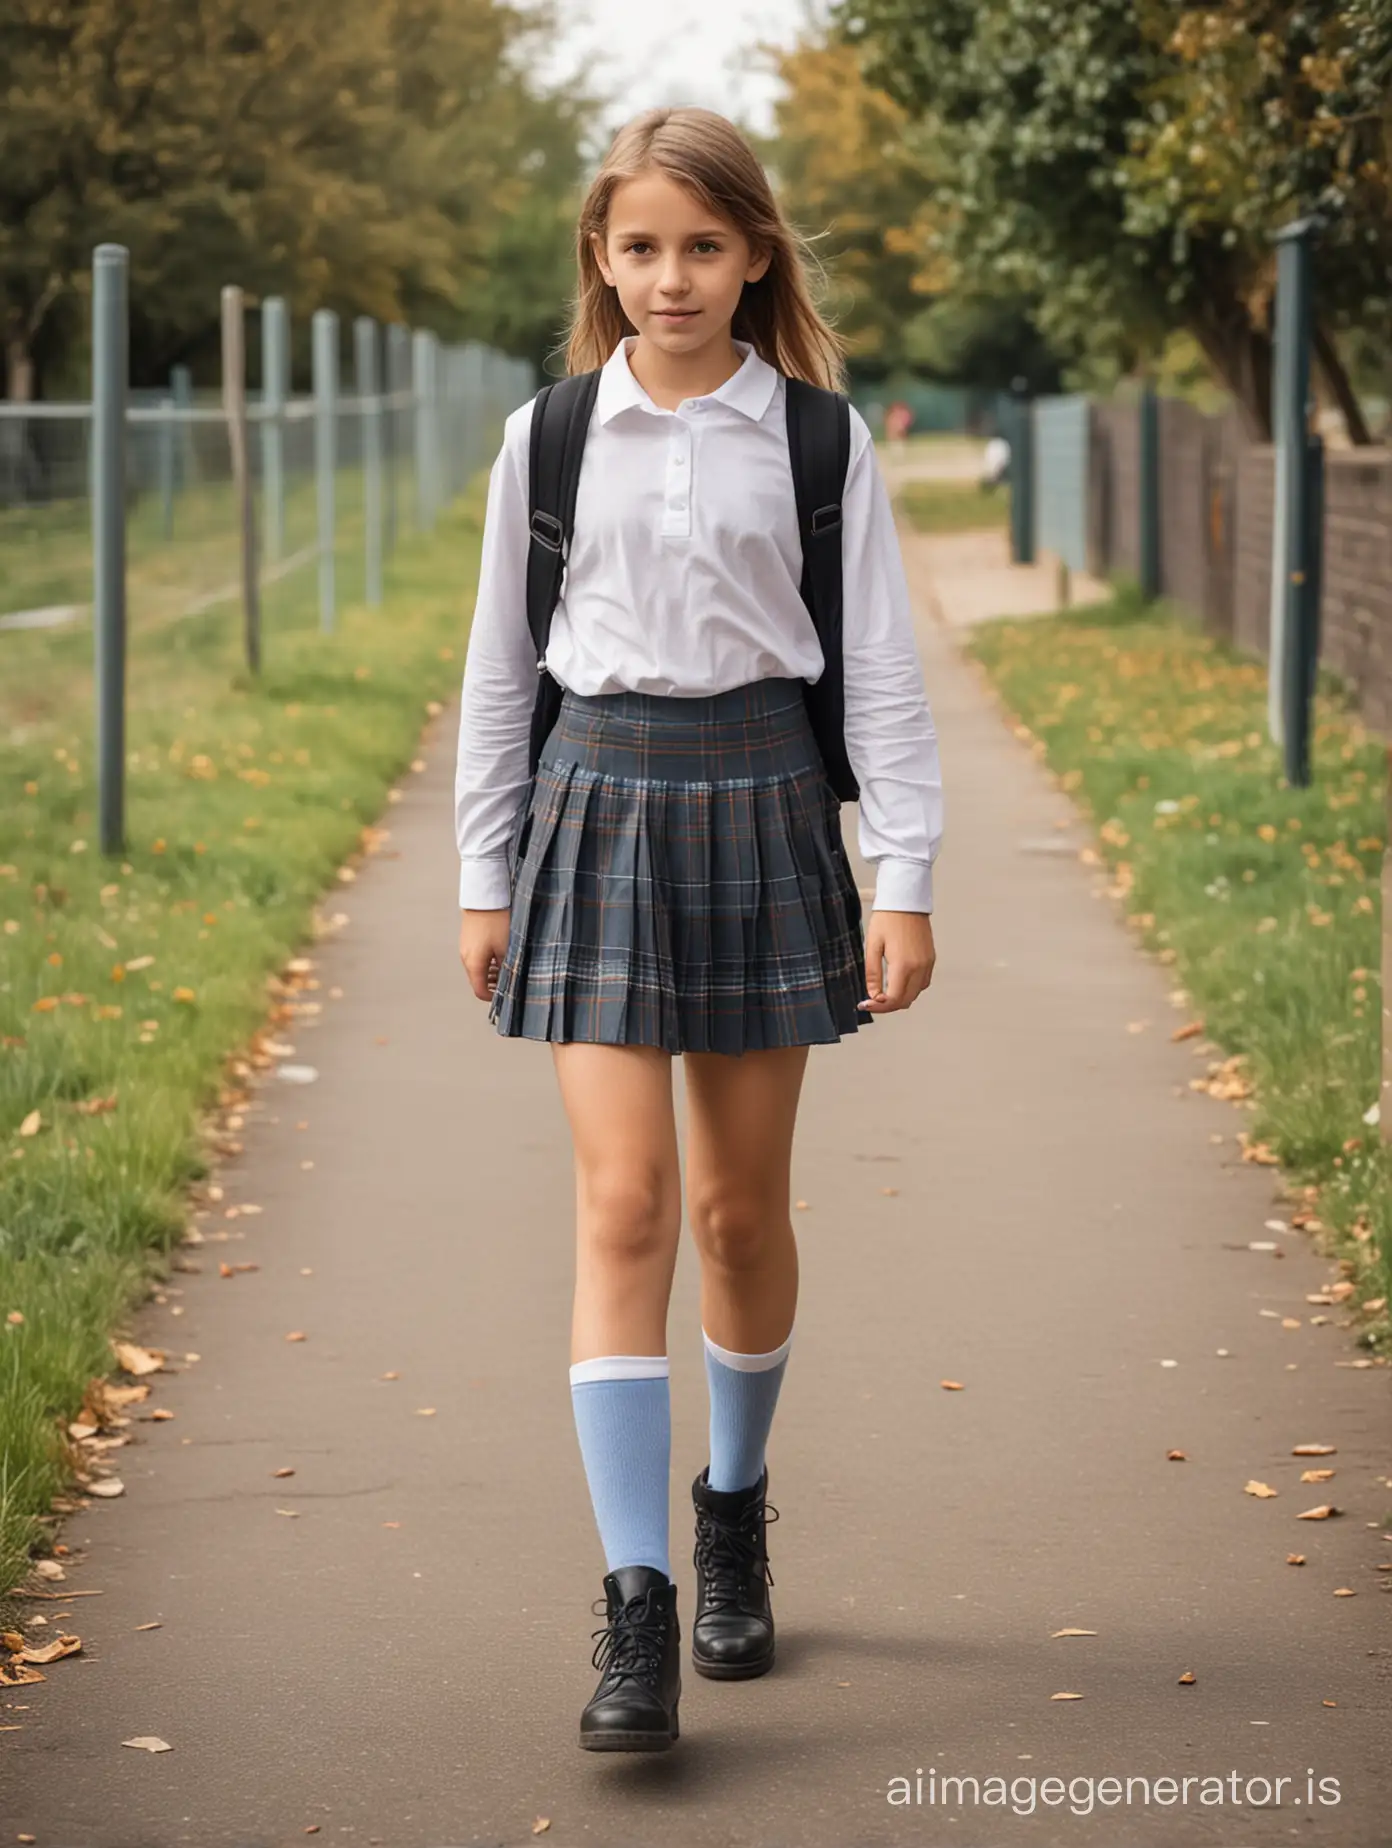 Young girl walking to school with short skirt